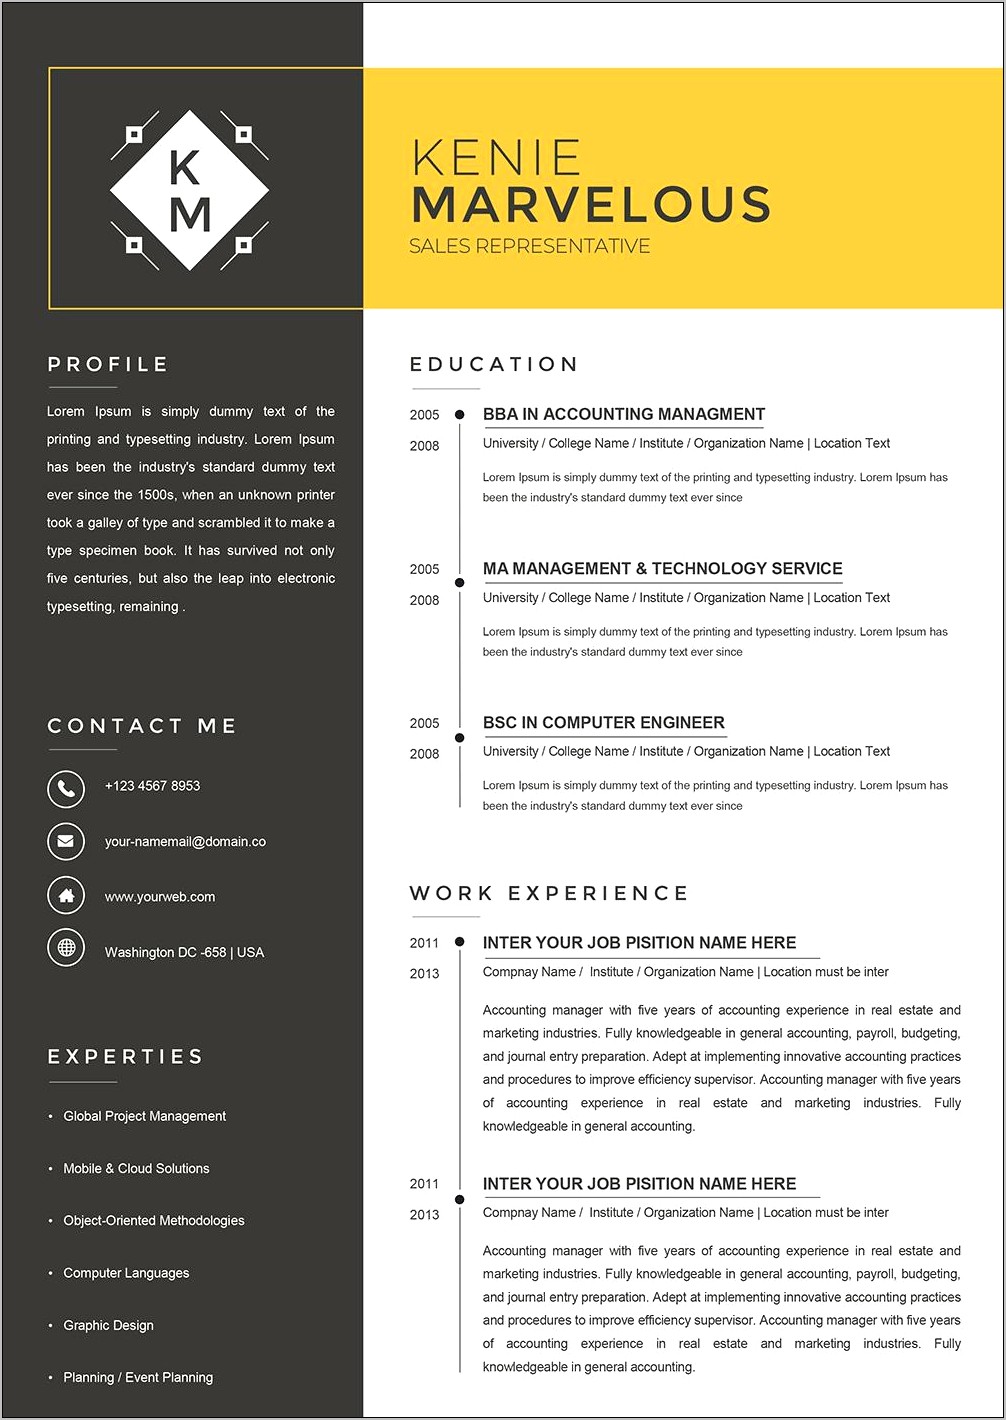 Microsoft Word Resume Template For Sale